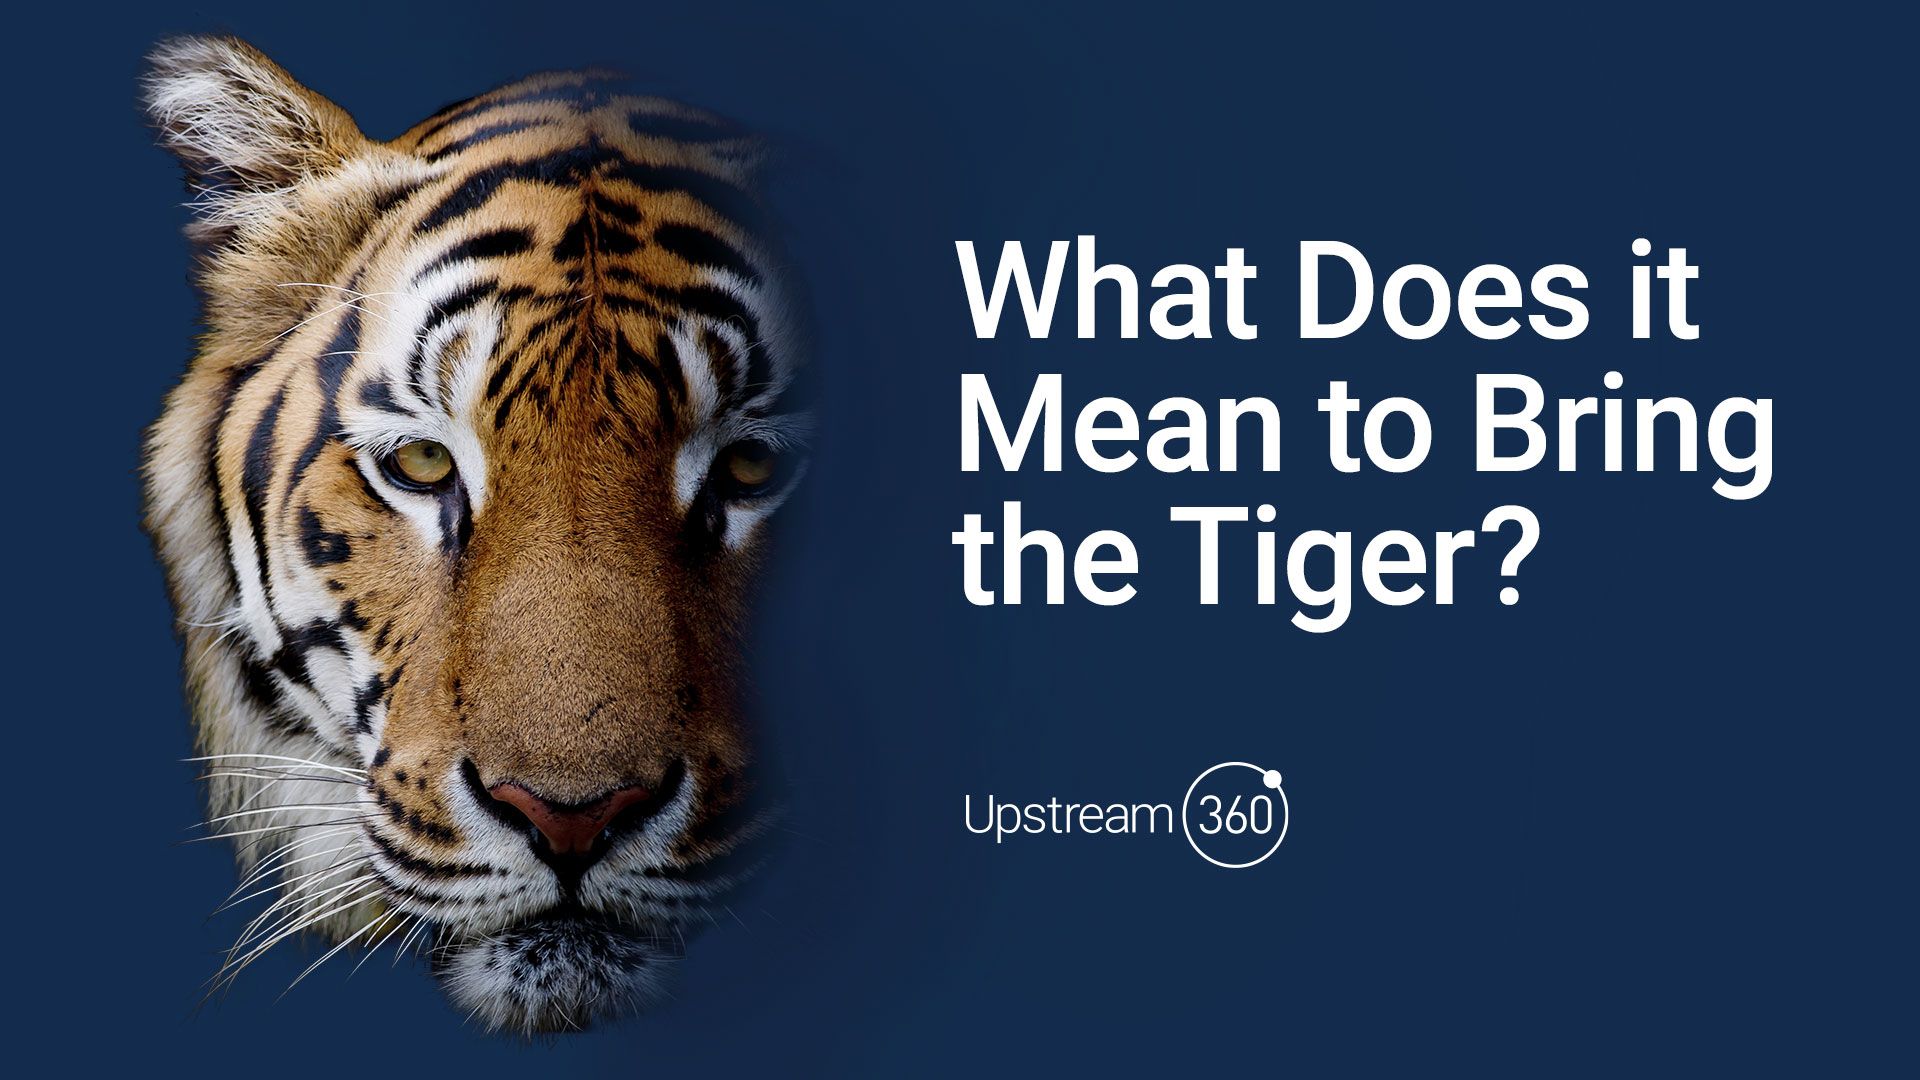 What Does it Mean to Bring the Tiger?